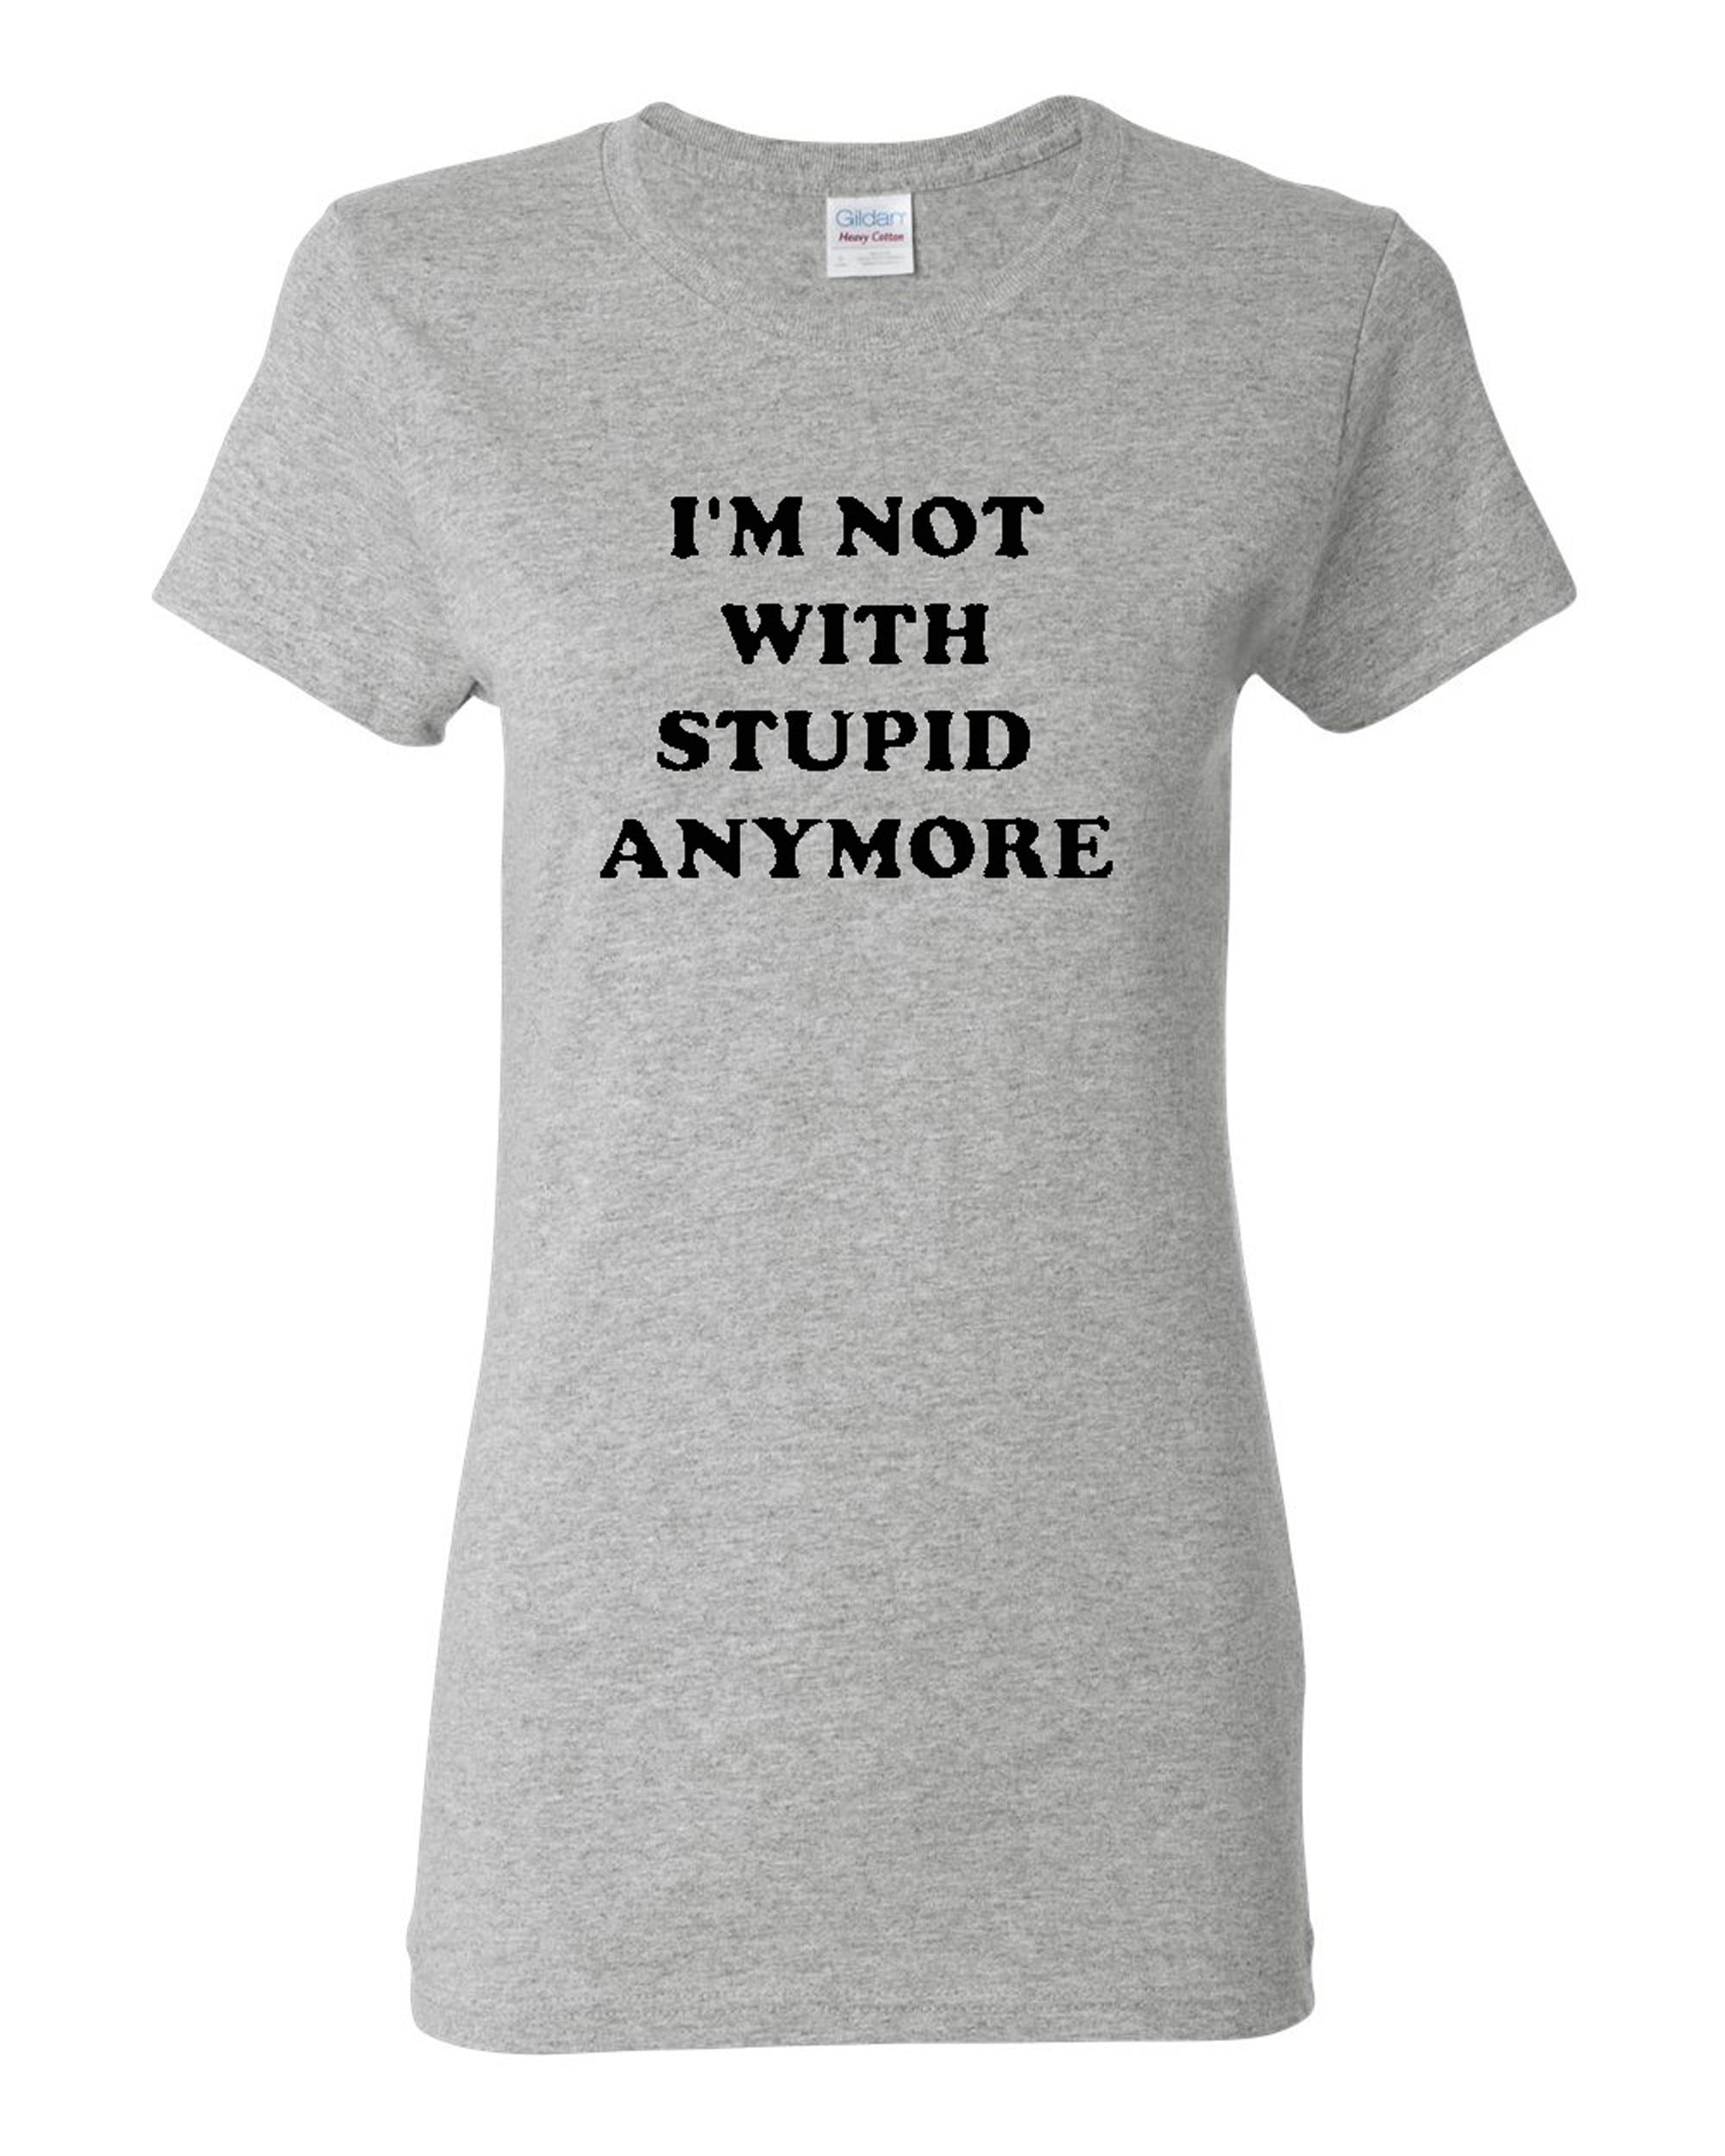 Ladies I'm Not With Stupid Anymore Funny Humor T-Shirt Tee - Walmart.com